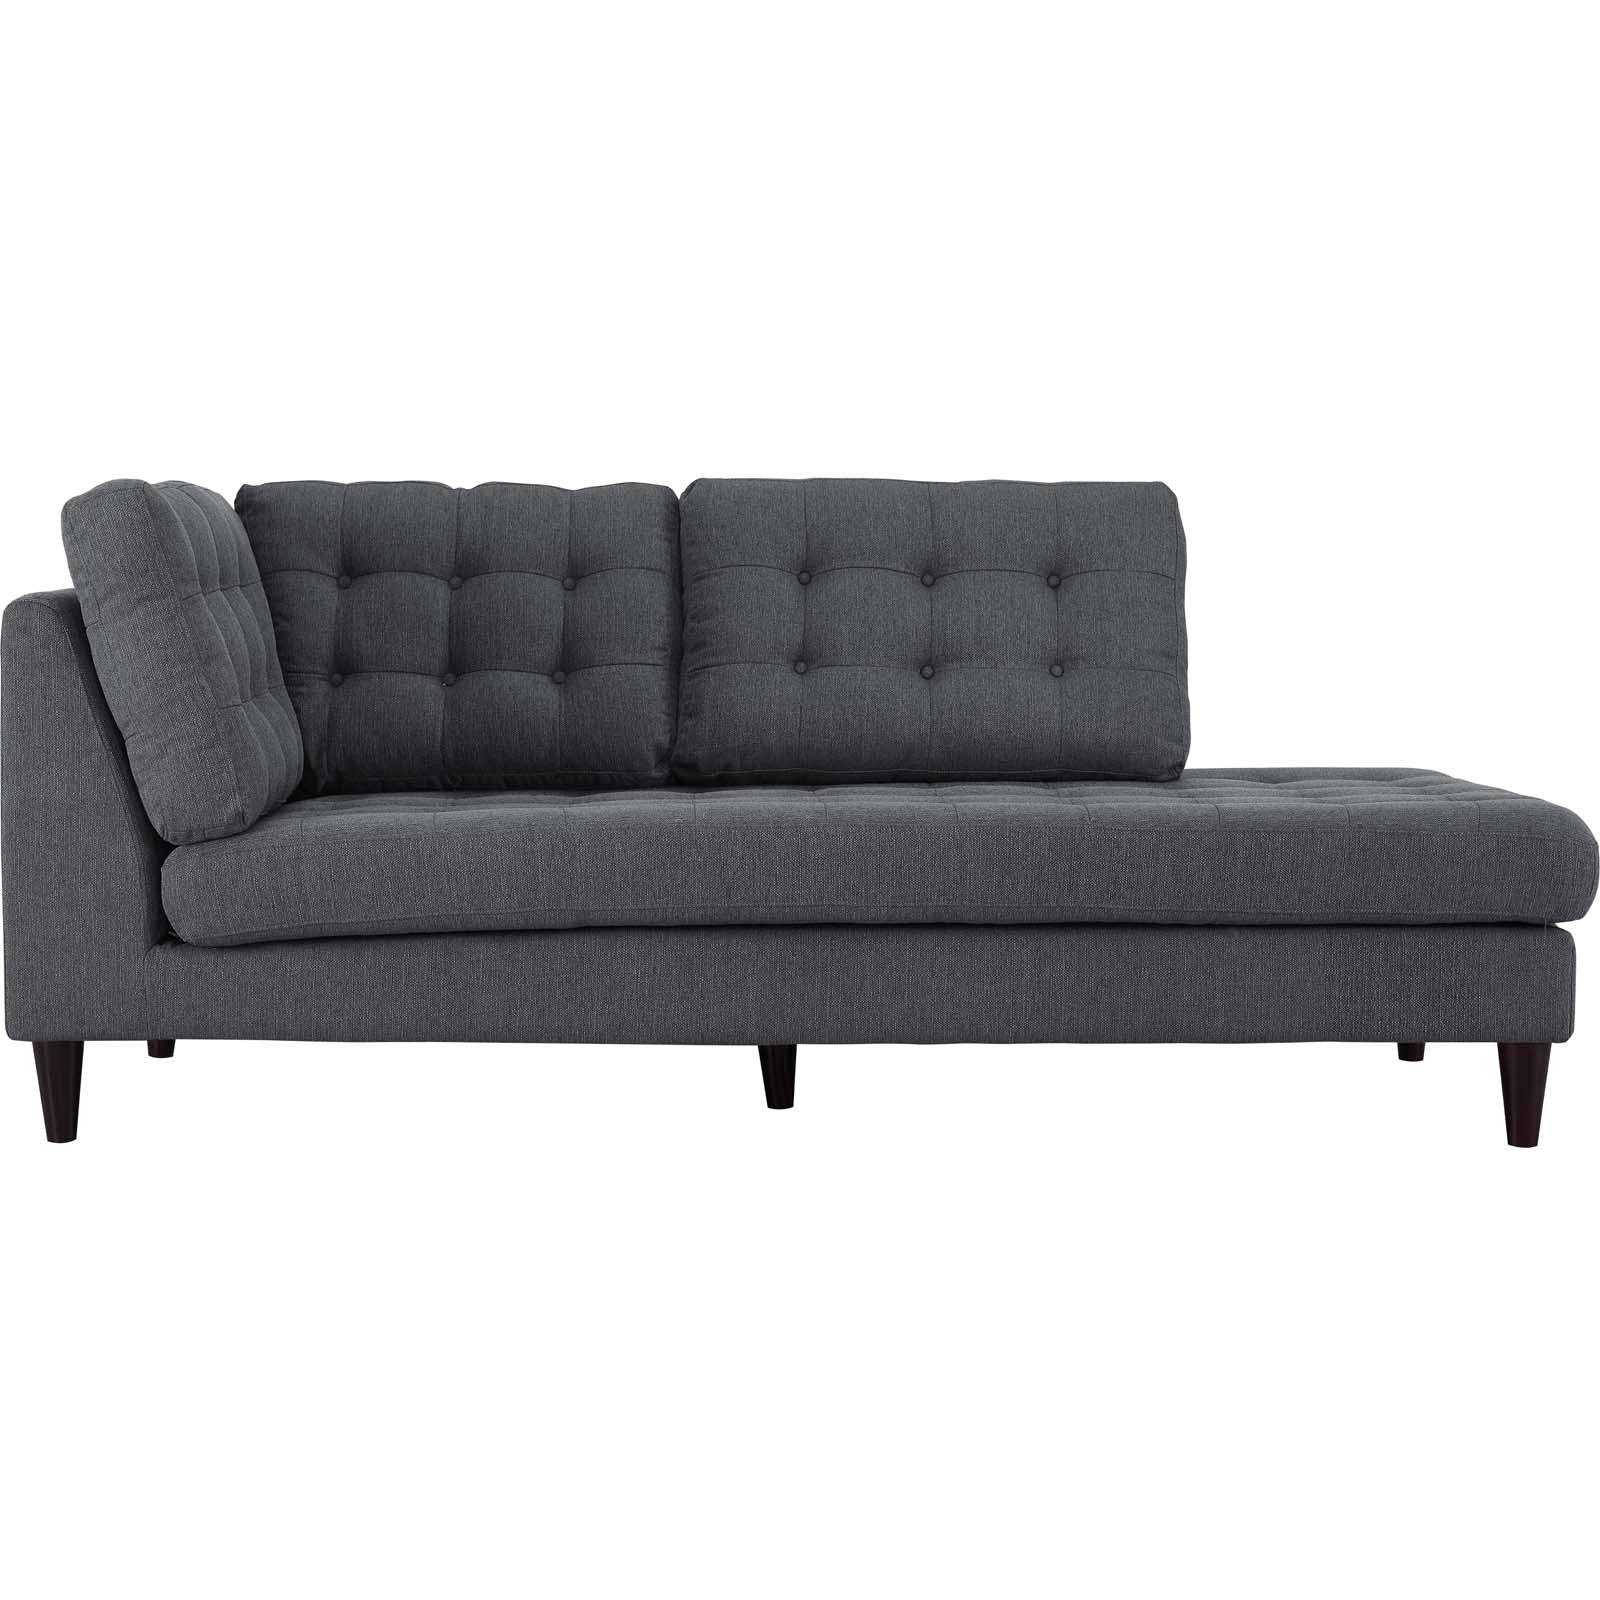 Modway Sleepers & Futons - Empress Upholstered Fabric Right Facing Bumper Gray